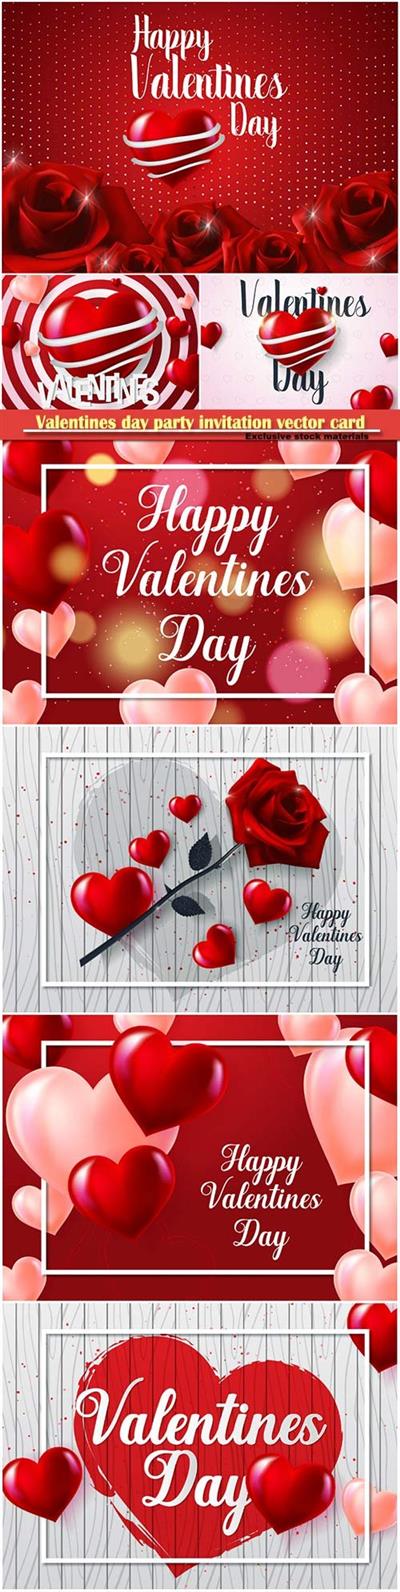 Valentines day party invitation vector card # 37